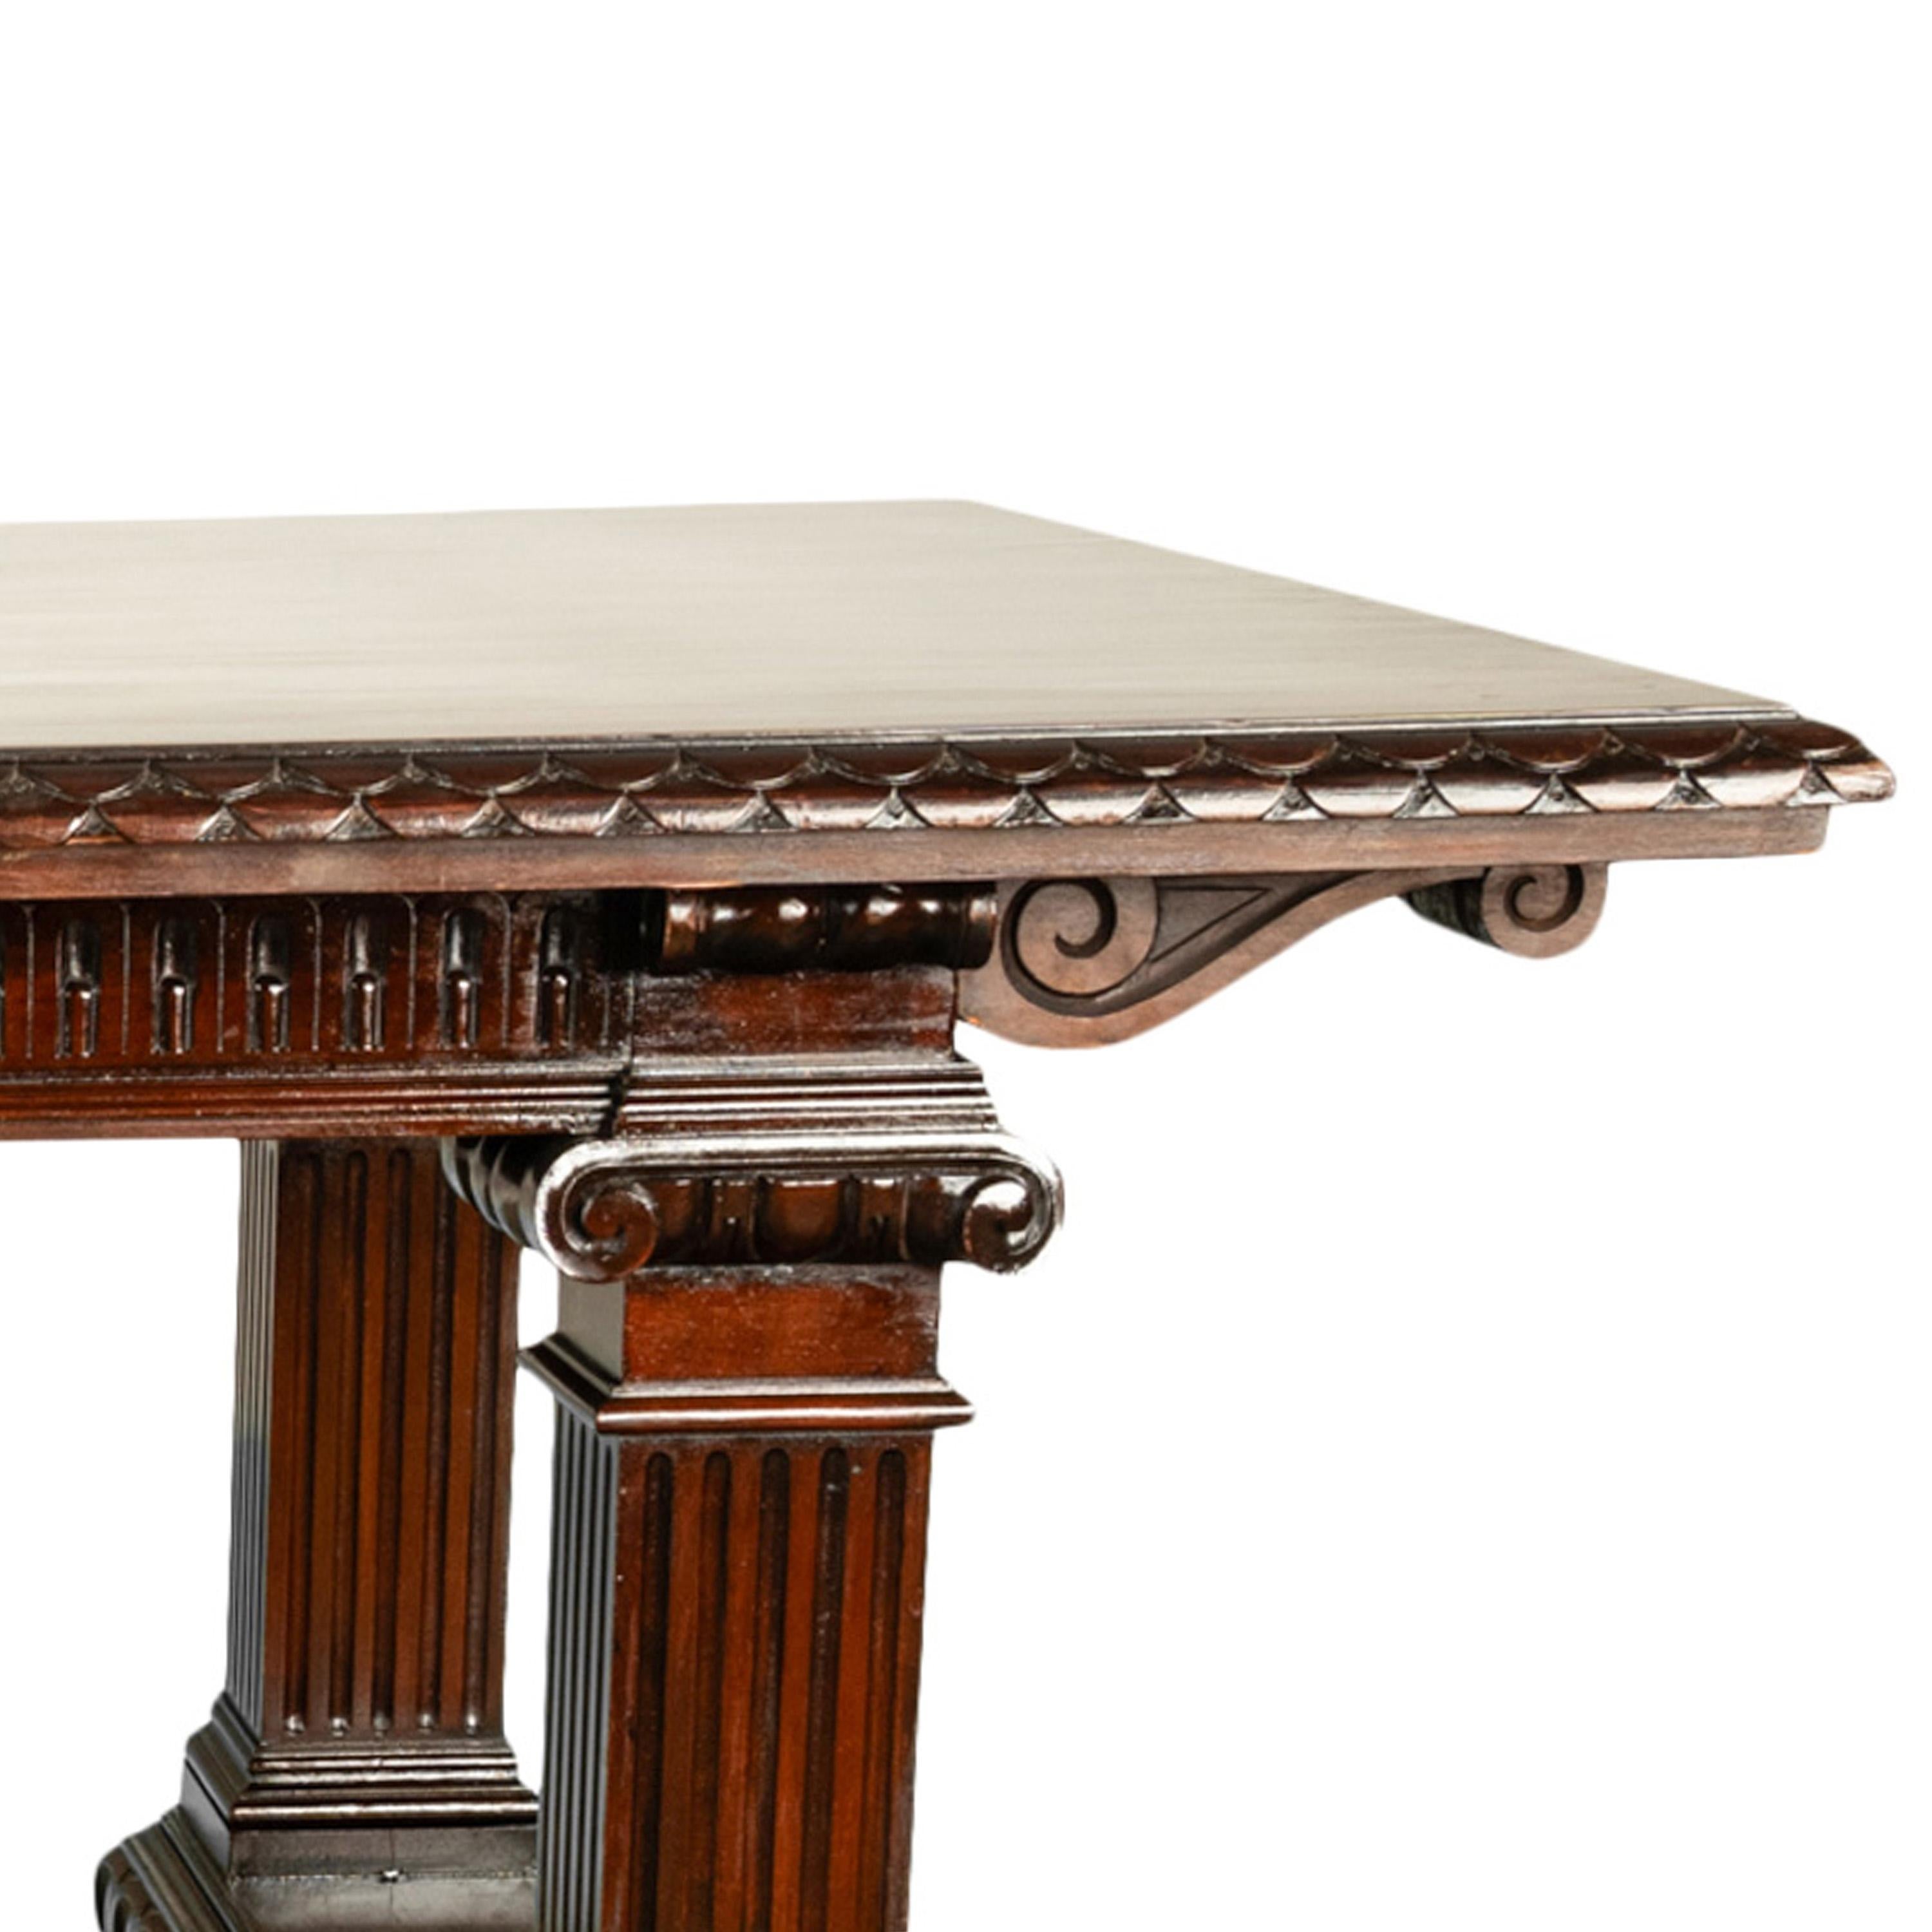 Antique Italian Carved Renaissance Revival Walnut Library Dining Table 1880 For Sale 11